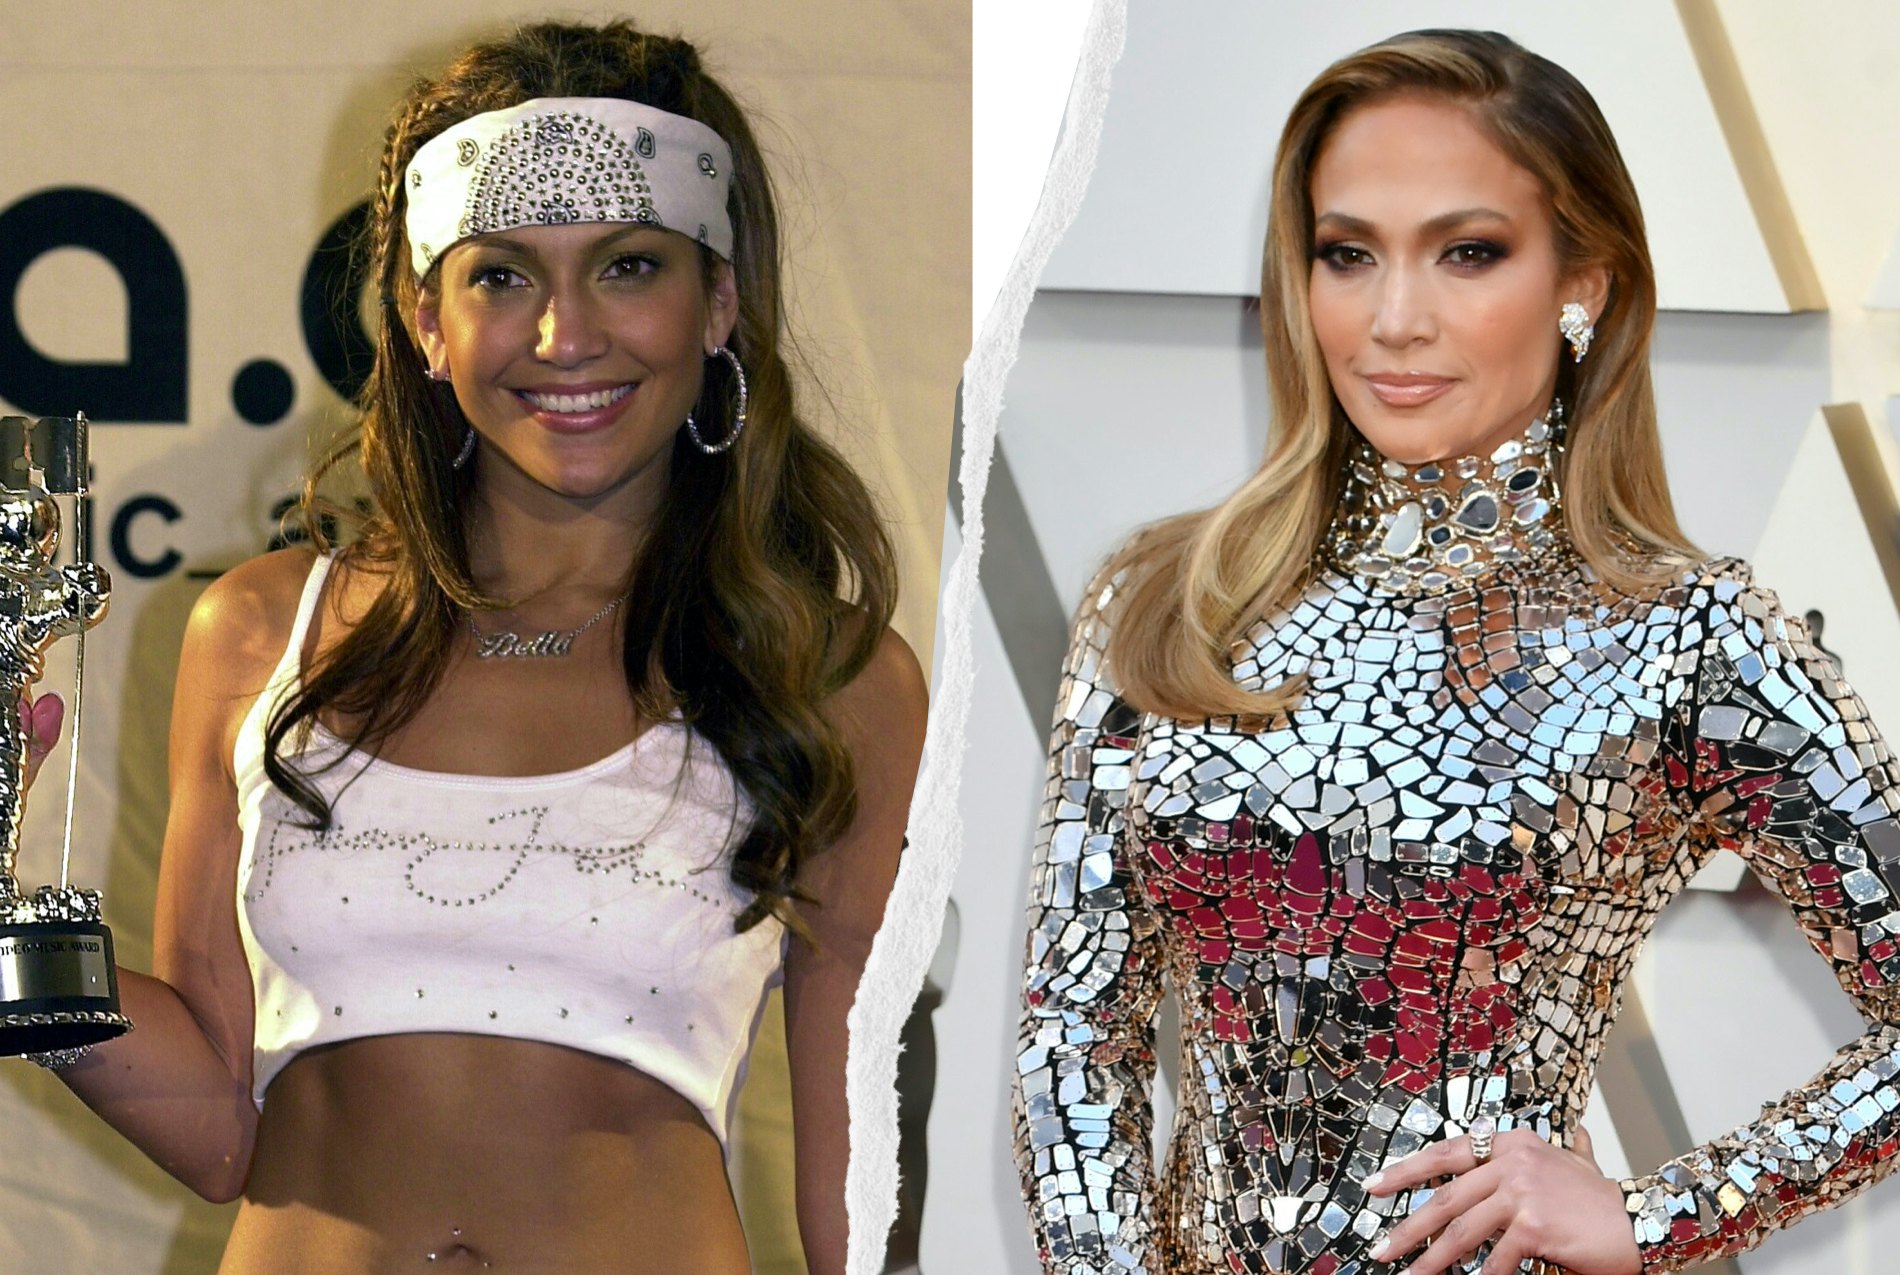 Jennifer Lopez Is White Hot in Form-Fitting Outfit on 'Idol